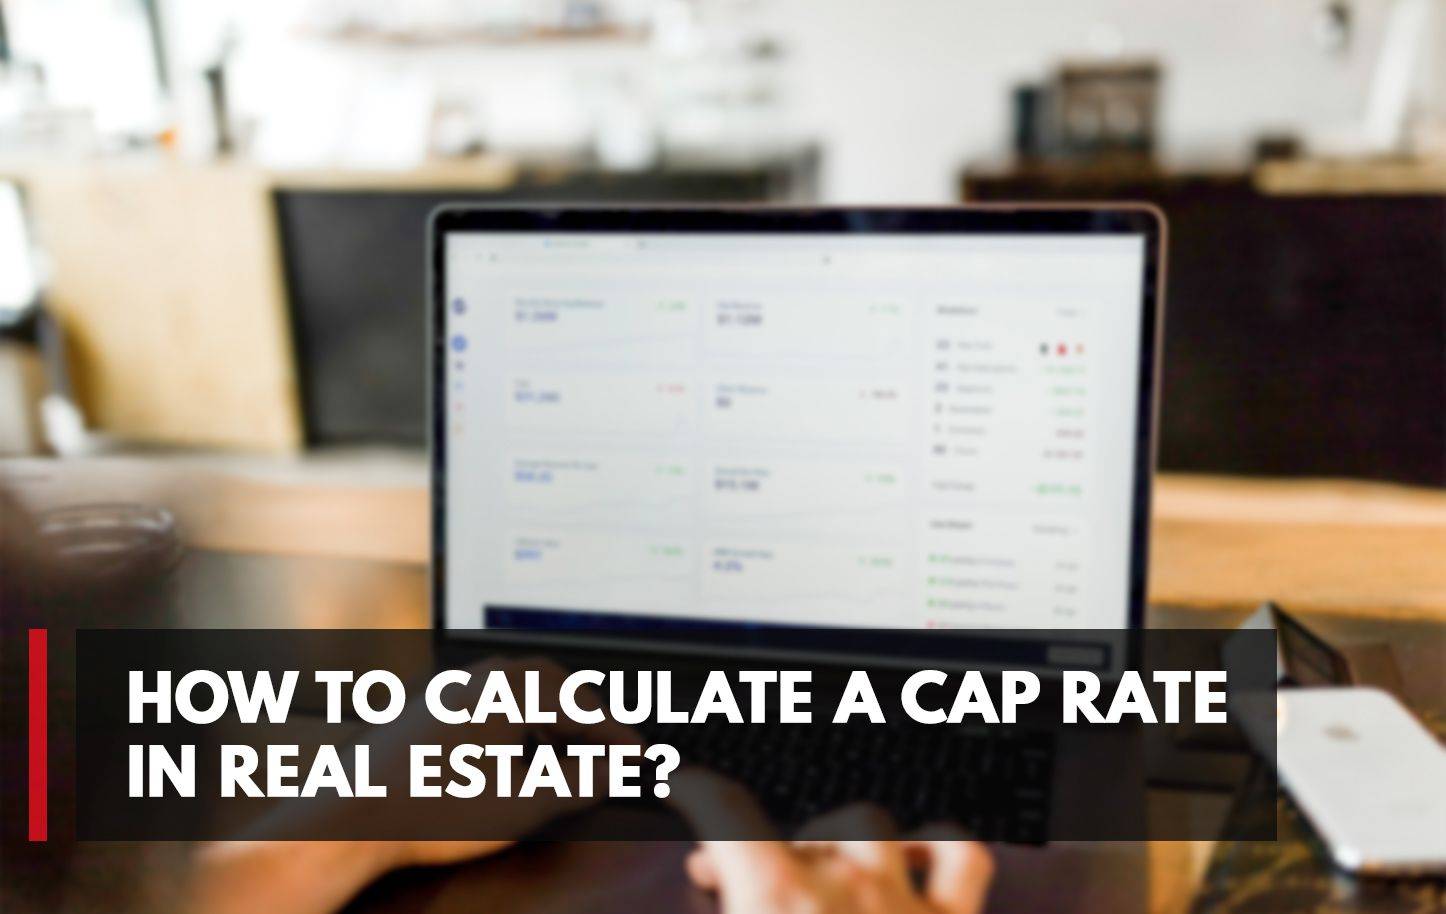 How To Calculate A Cap Rate In Real Estate?